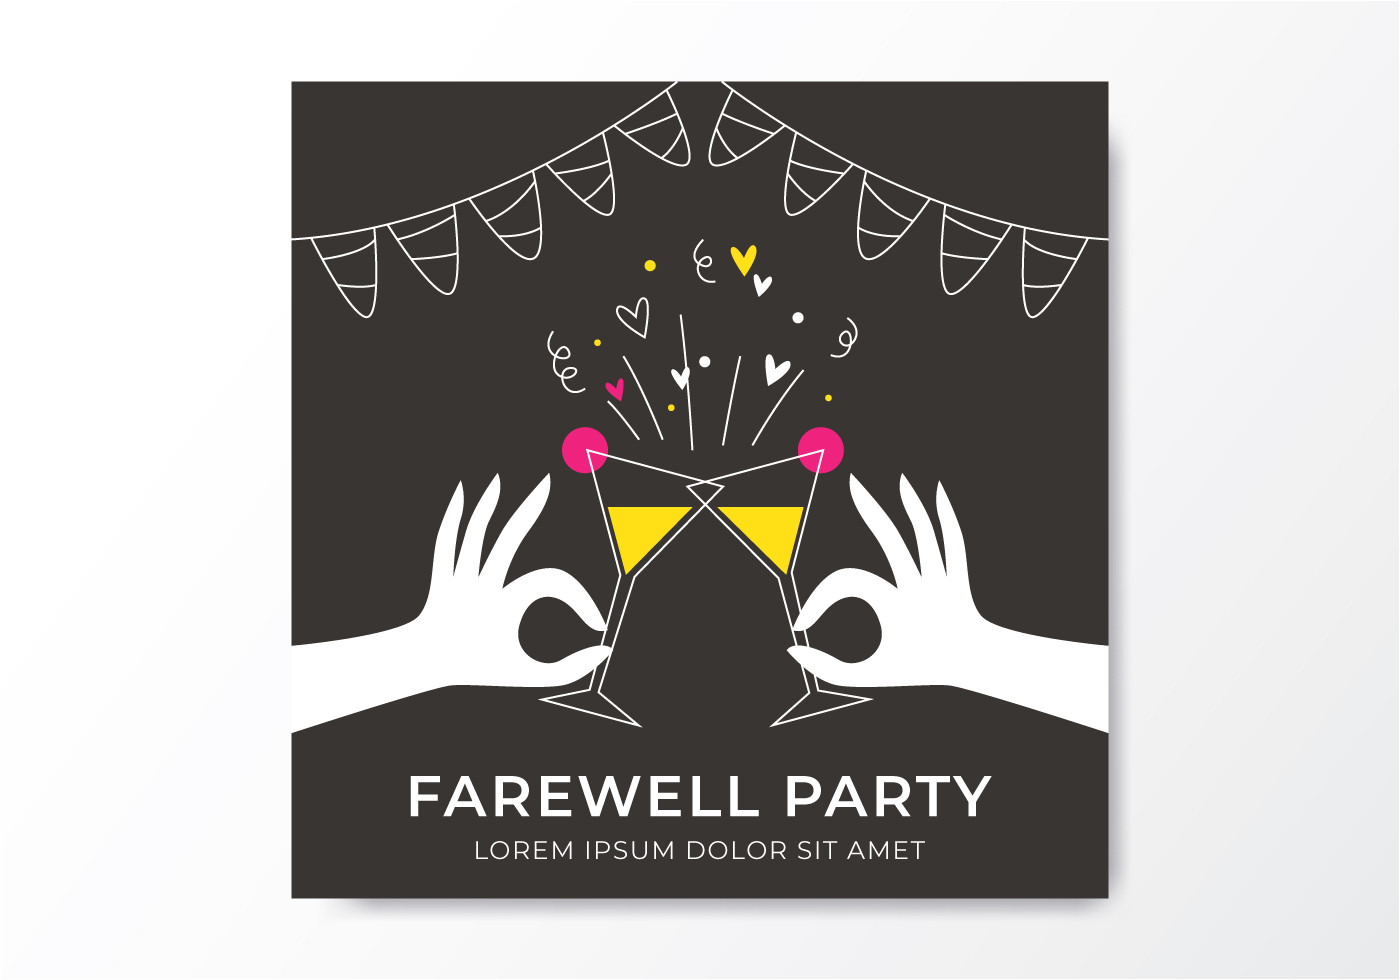 Farewell Card Vector Free Download Farewell Party Free Vector Art 5 Free Downloads